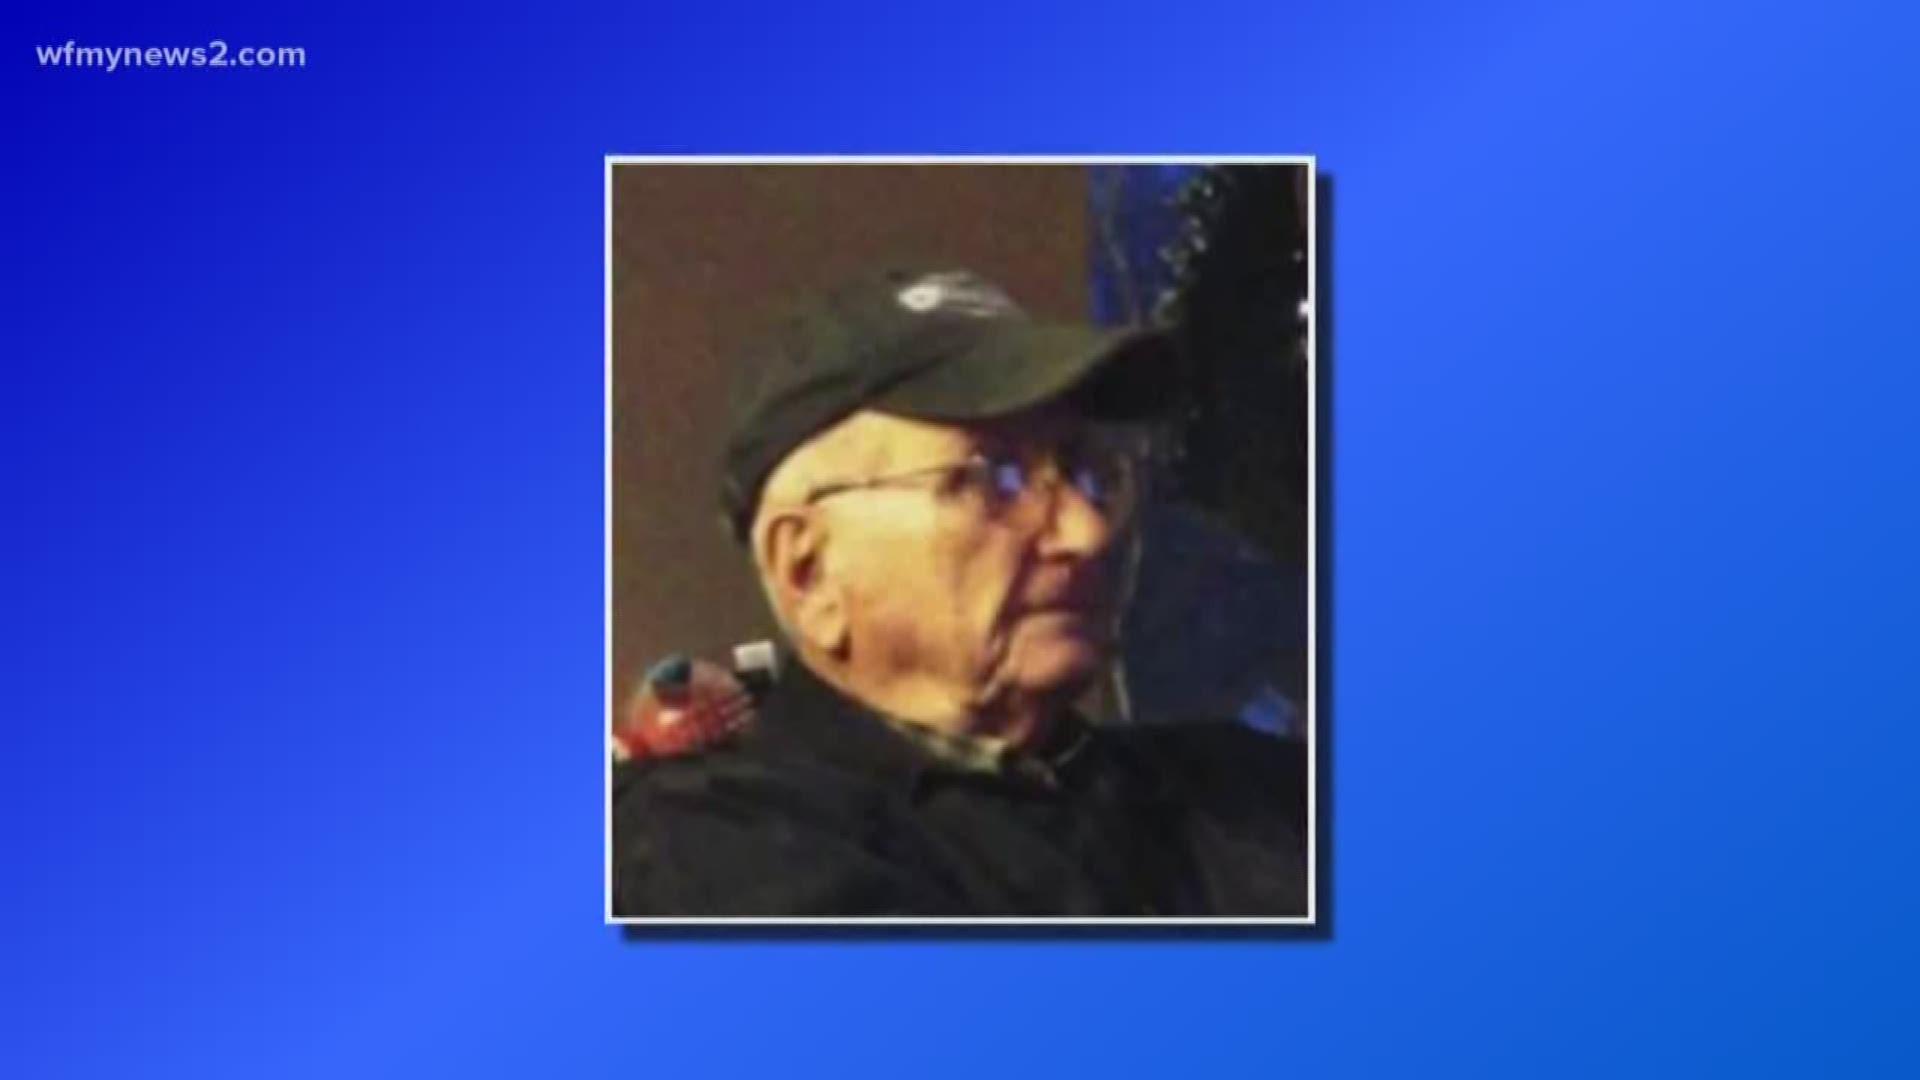 Police suspect foul play after an elderly man goes missing in the triad. At least two suspects are being sought out.